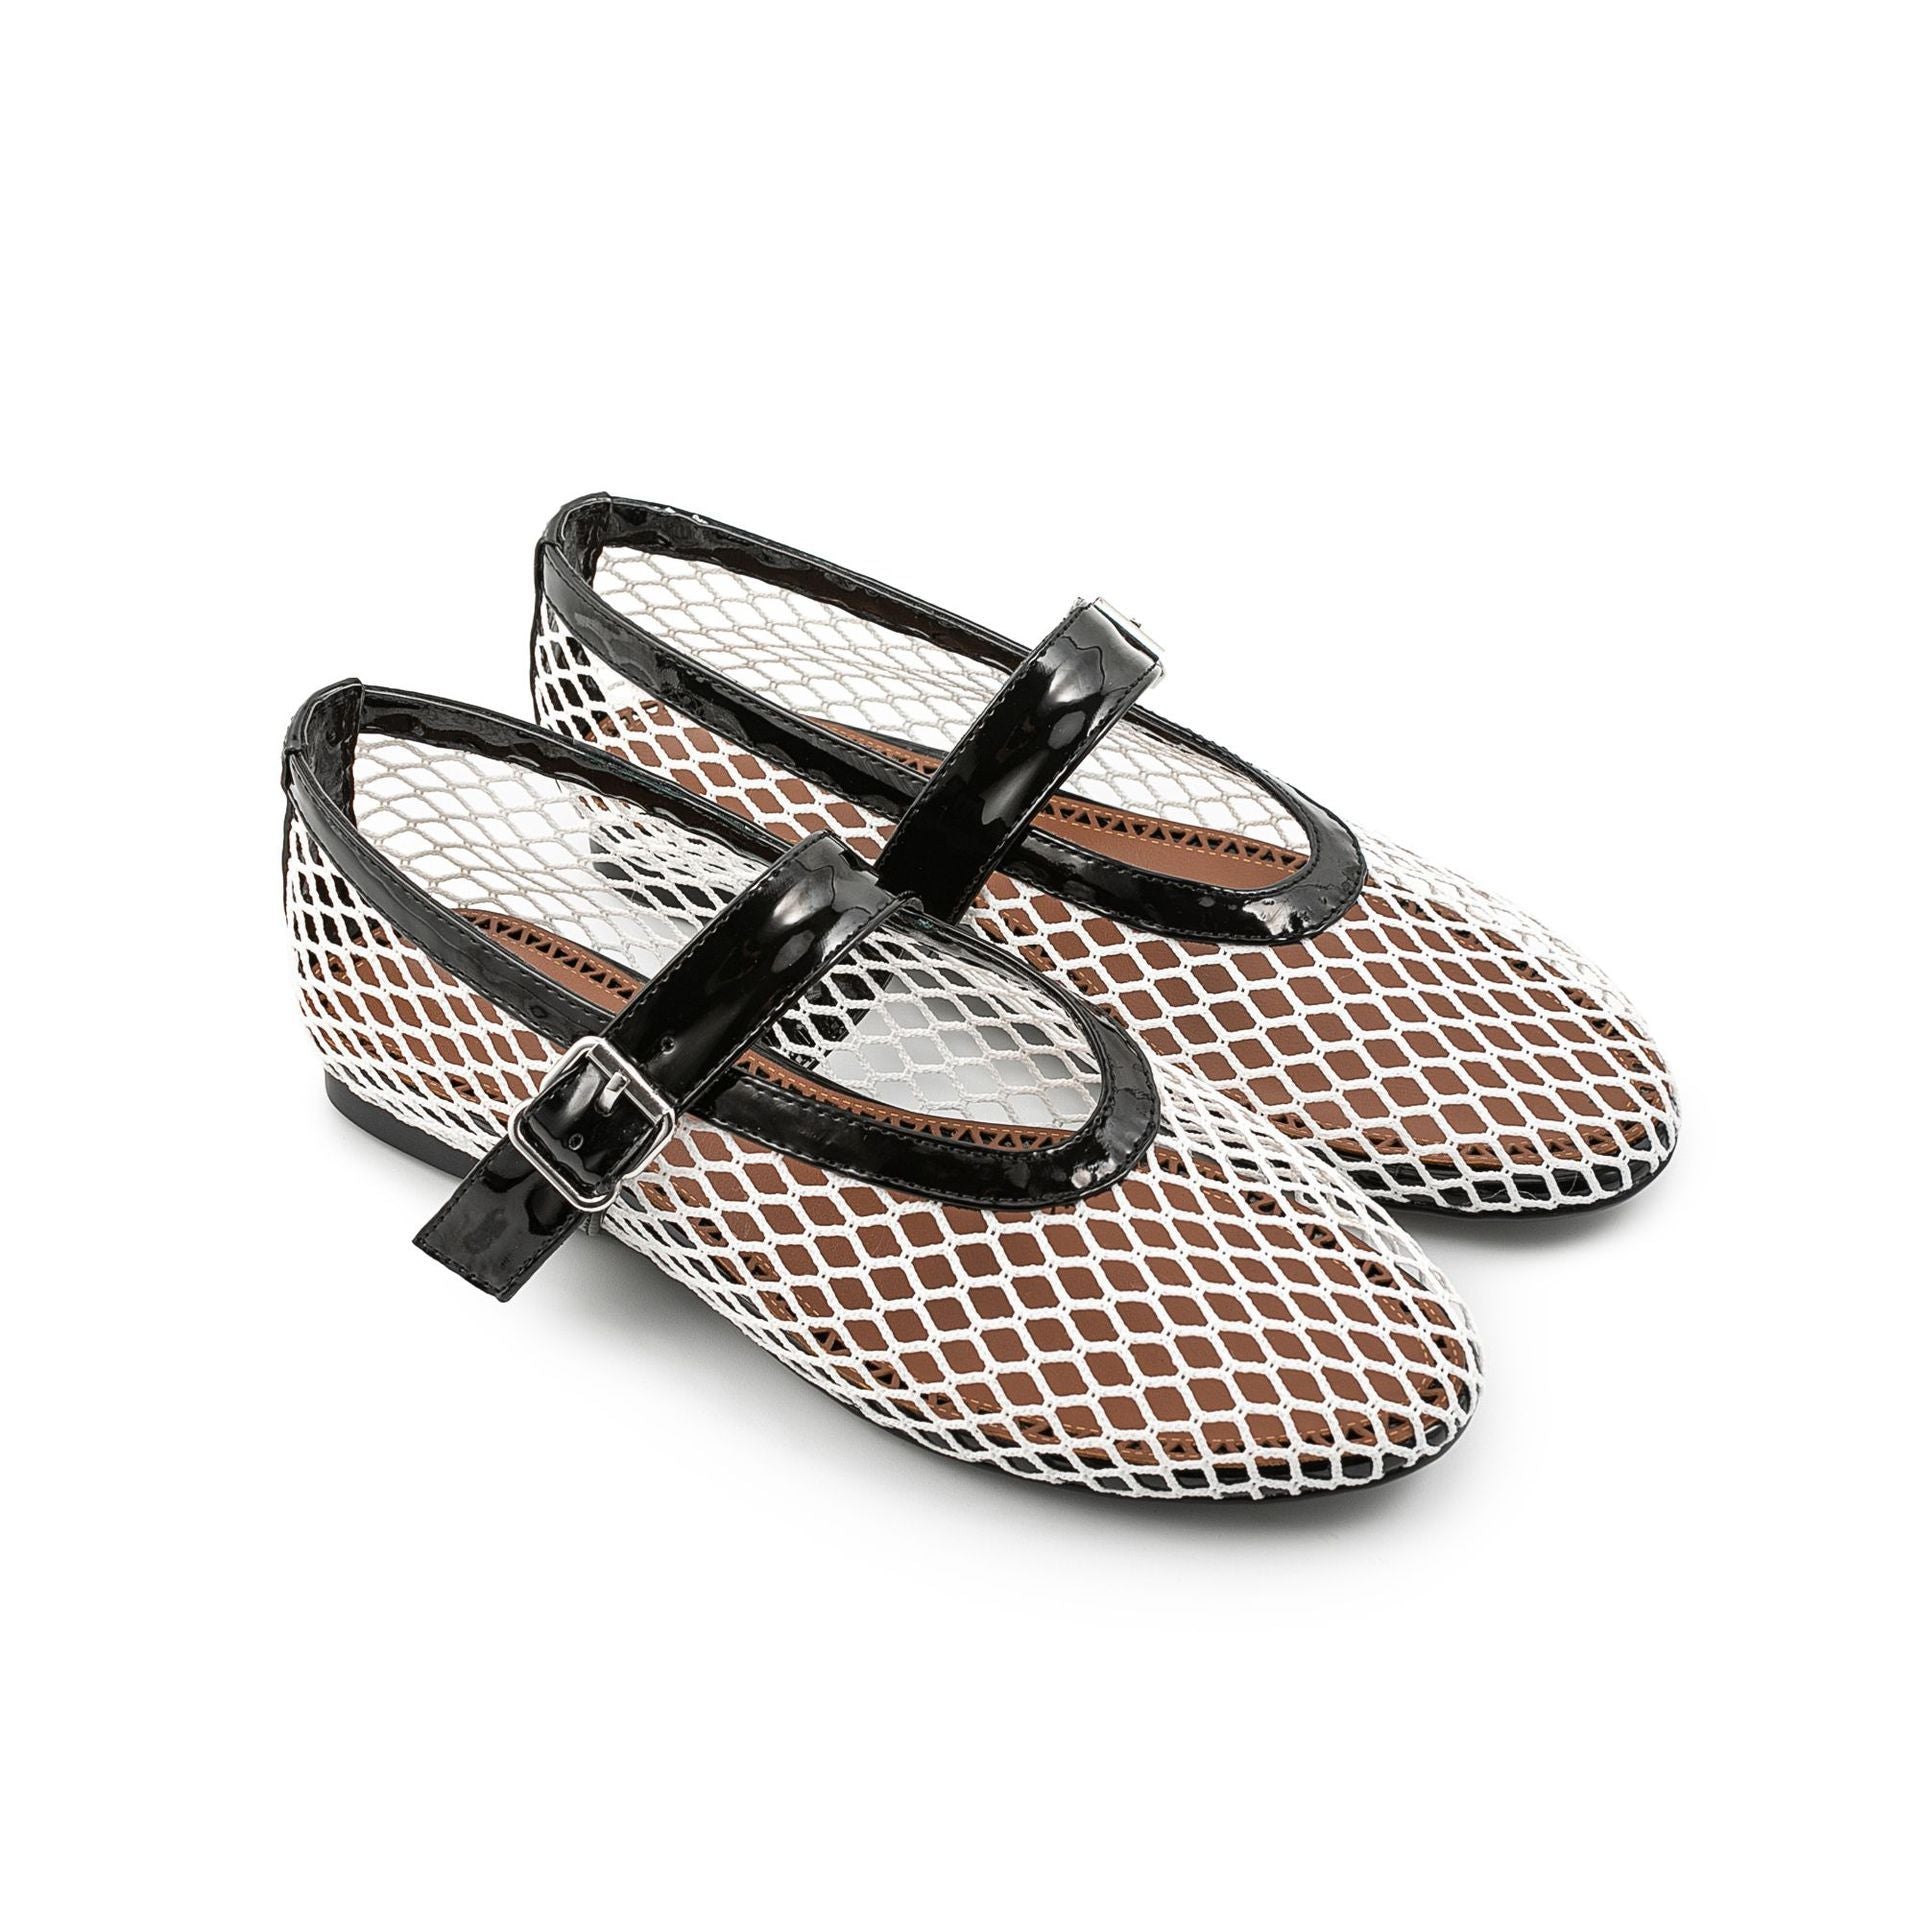 Mary Jane Mesh Ankle Buckle Ballet Flat Sandals